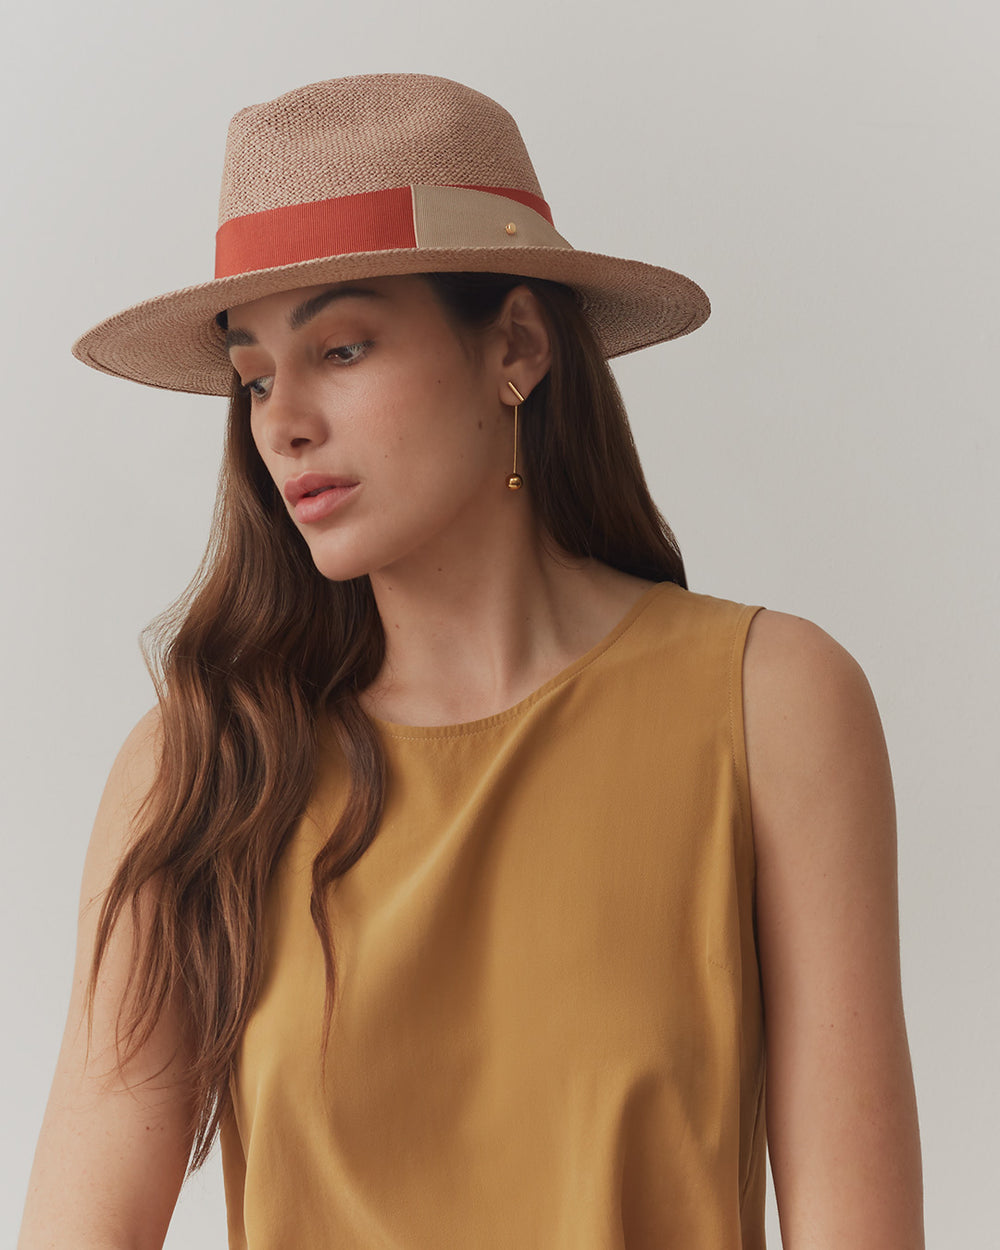 Woman wearing a hat and sleeveless top looking away.